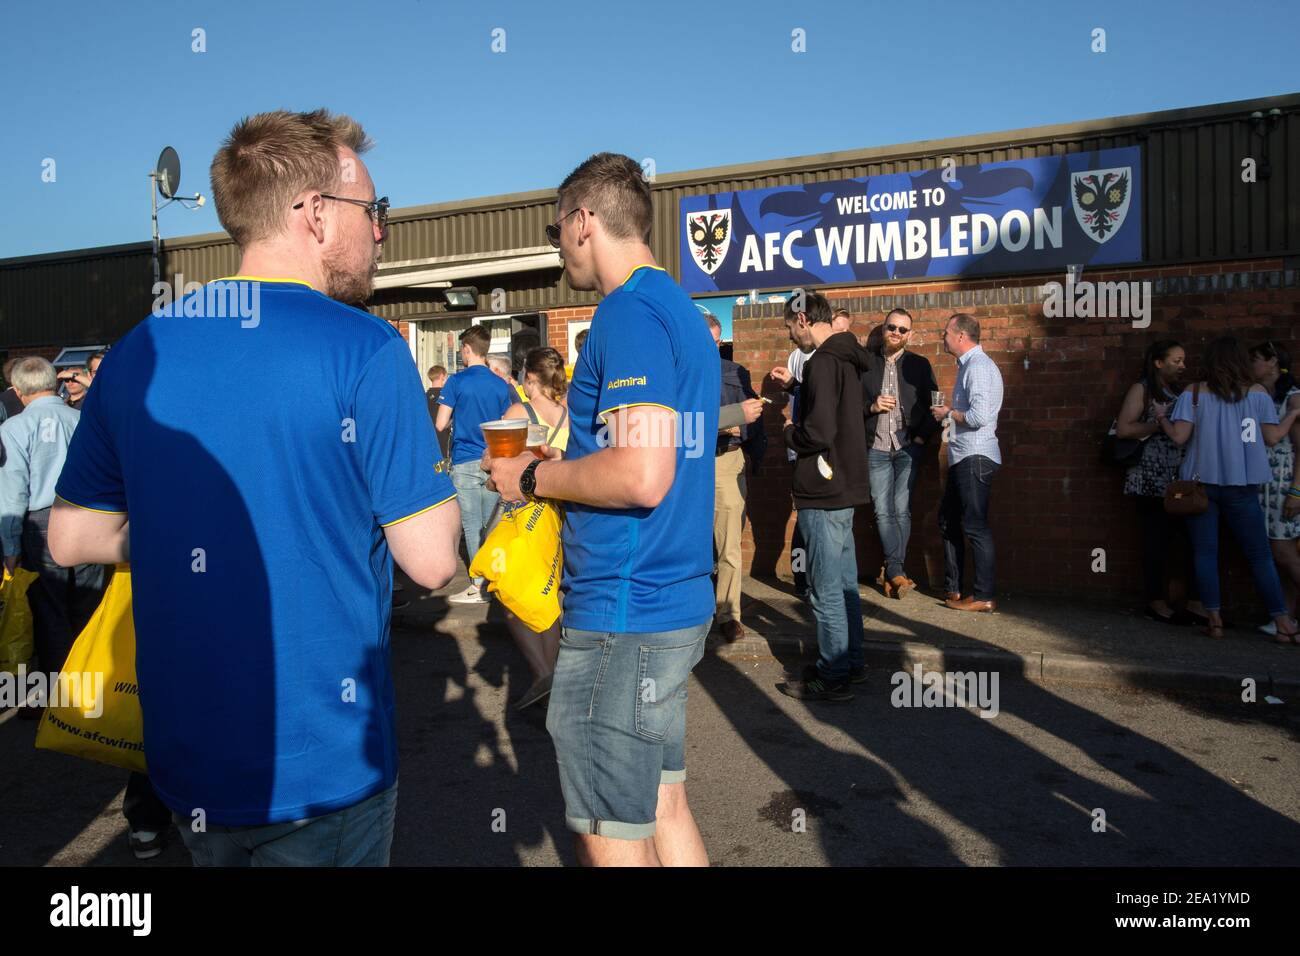 AFC Wimbledon fans drinking beer before the game at AFC Wimbledon football club, England. Stock Photo